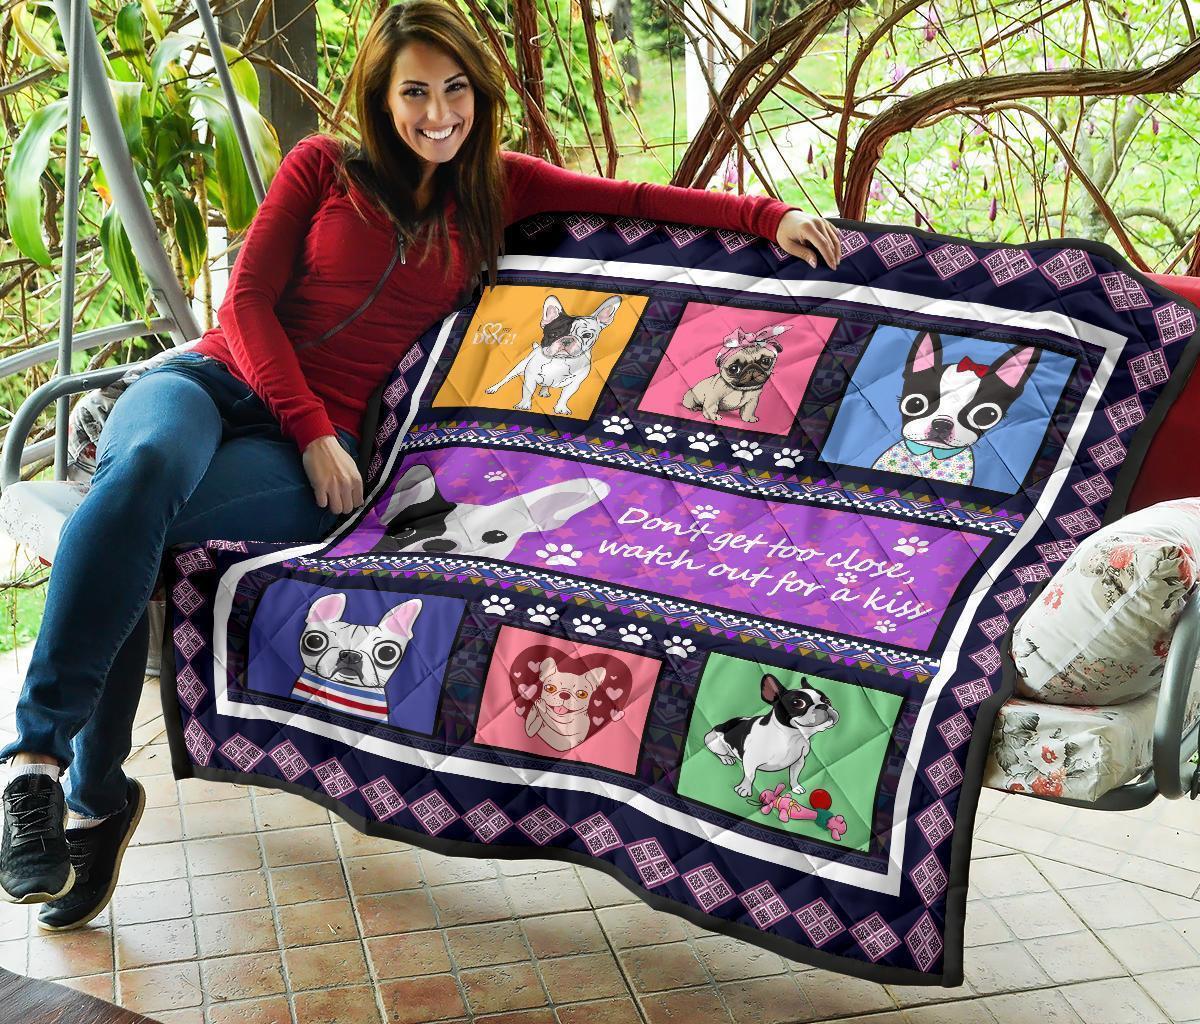 Watch Out For A Kiss French Bulldog Quilt Blanket-Gear Wanta